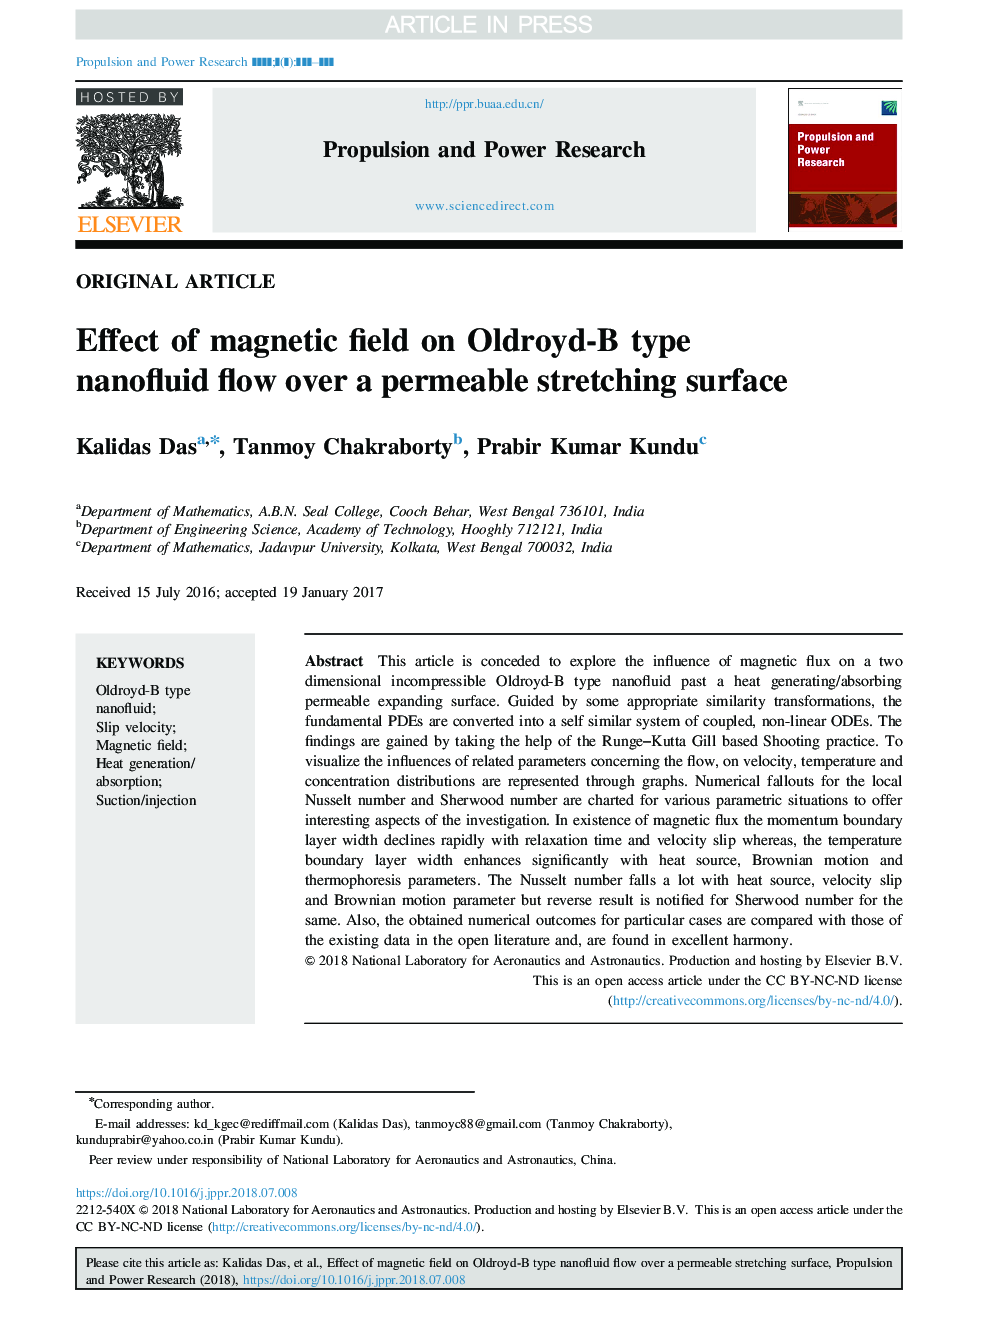 Effect of magnetic field on Oldroyd-B type nanofluid flow over a permeable stretching surface